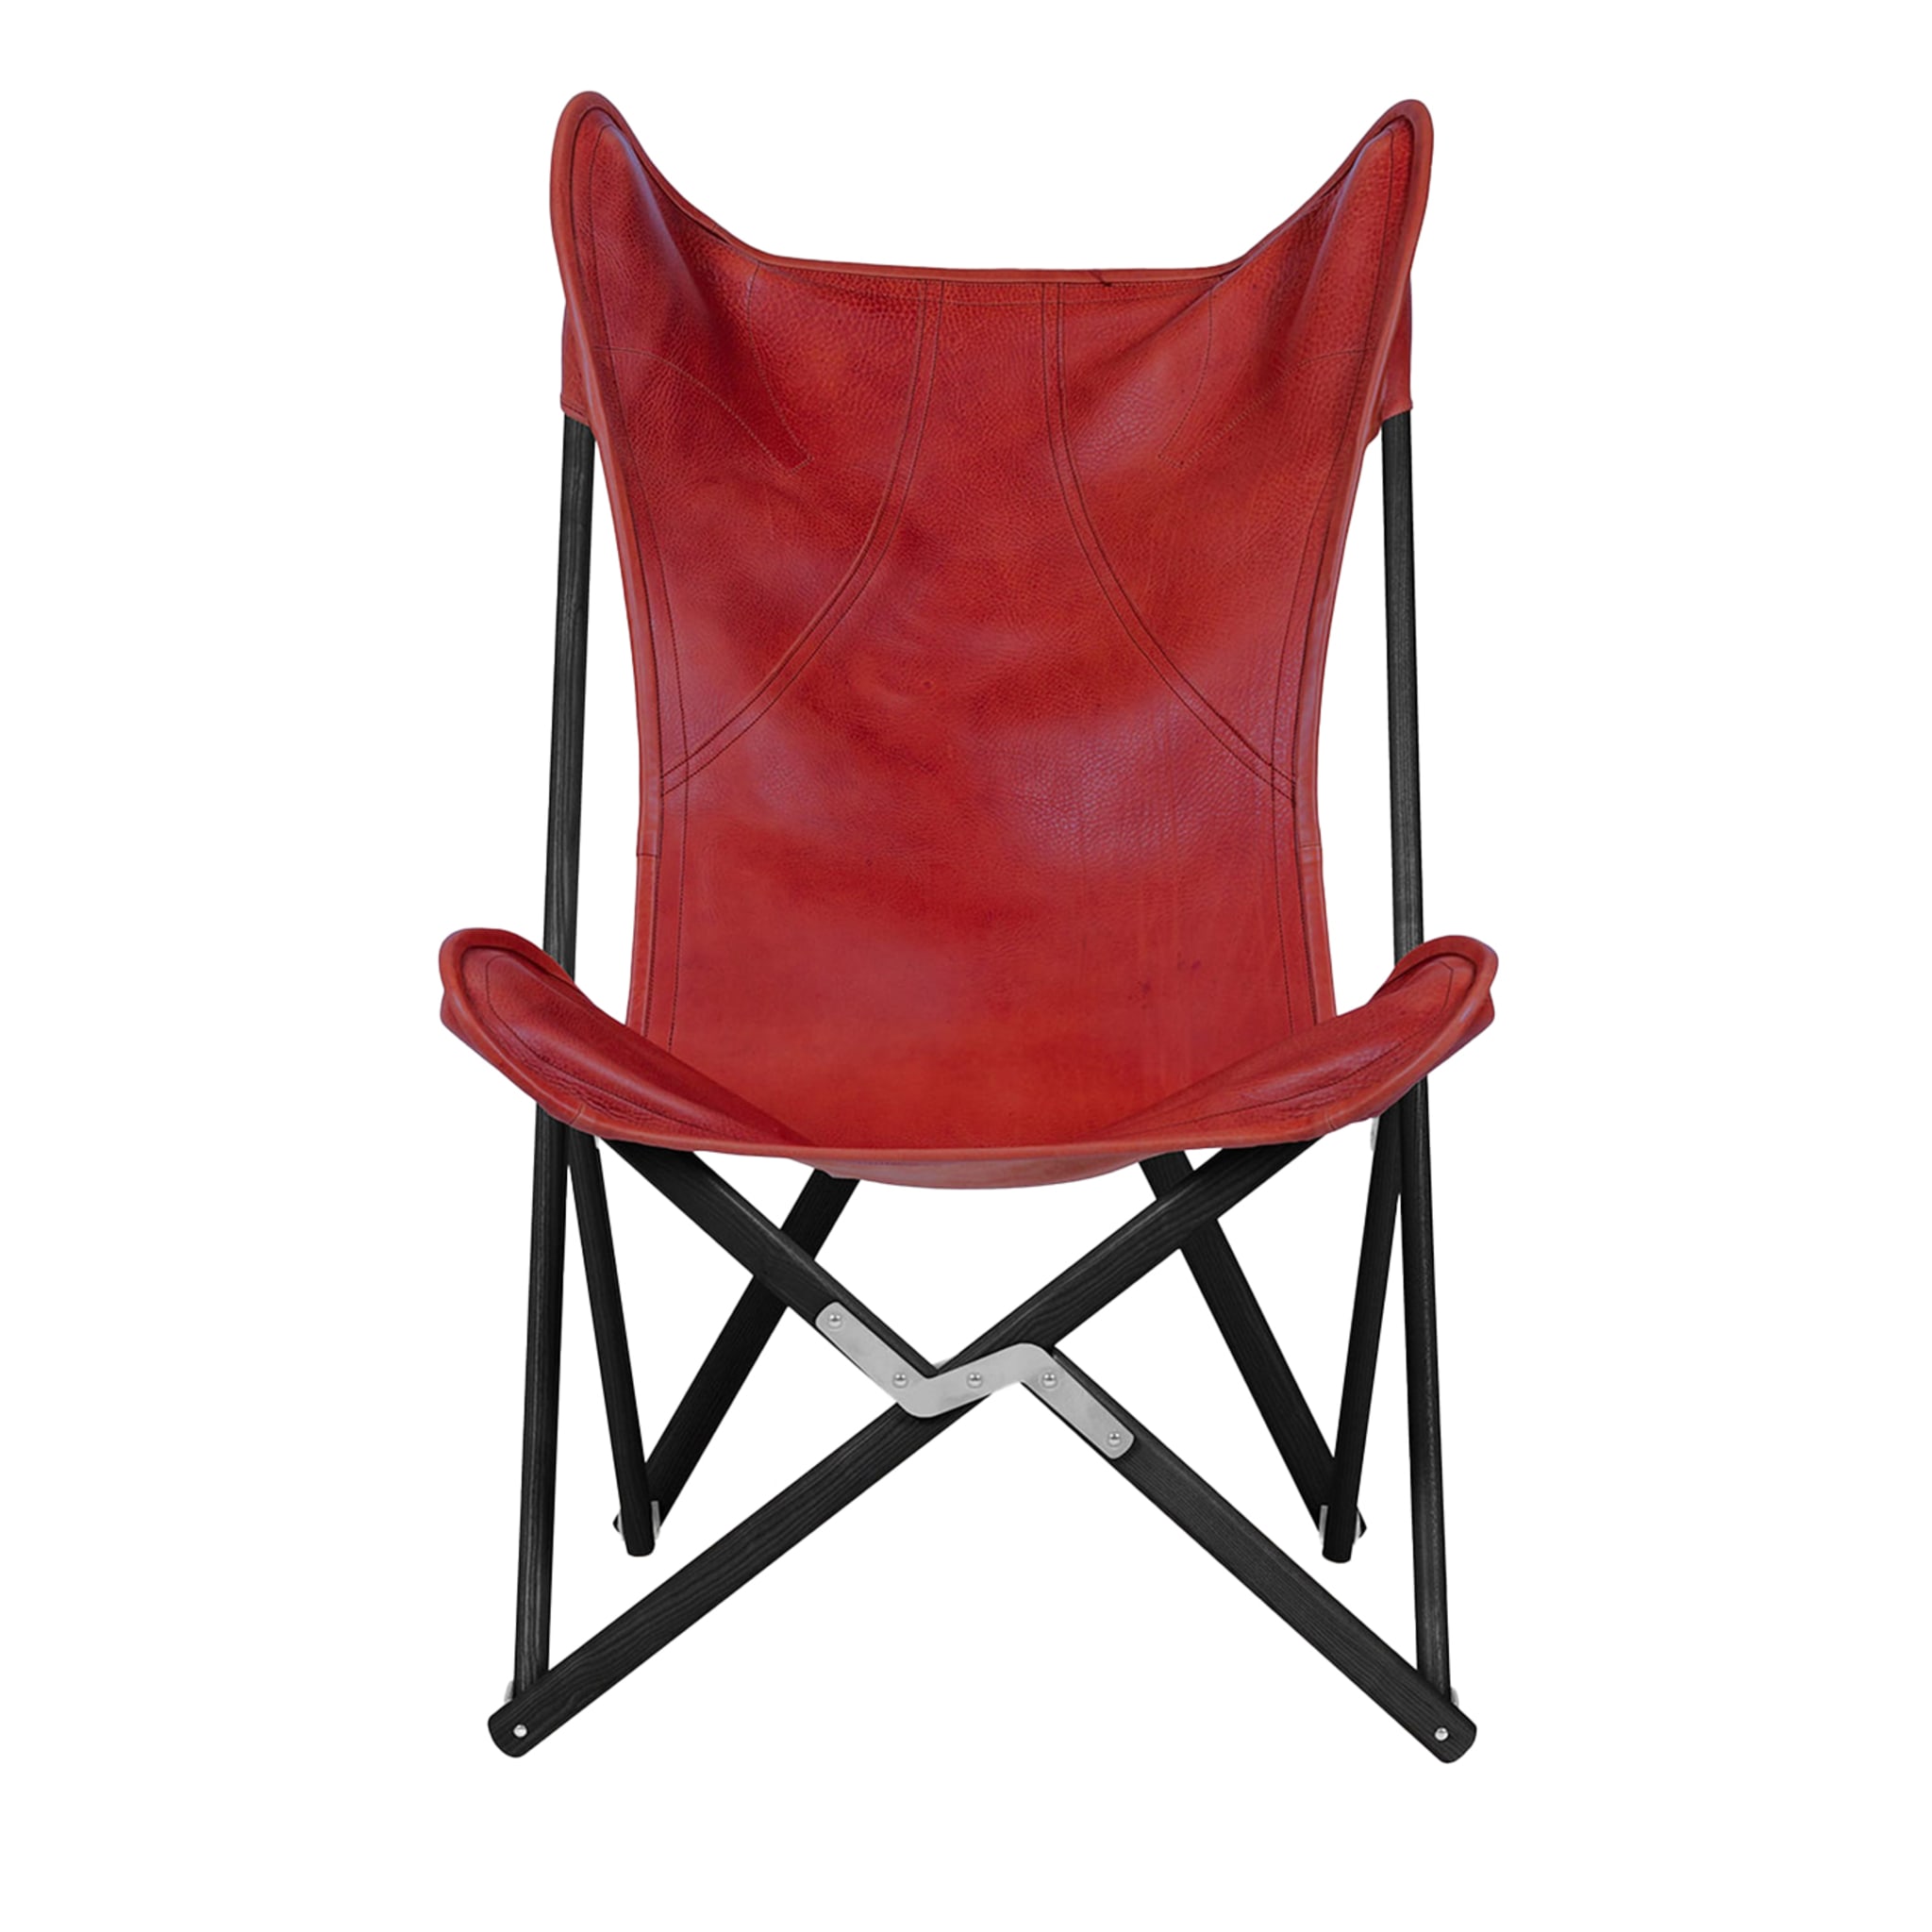 Tripolina Armchair in Red Leather - Main view